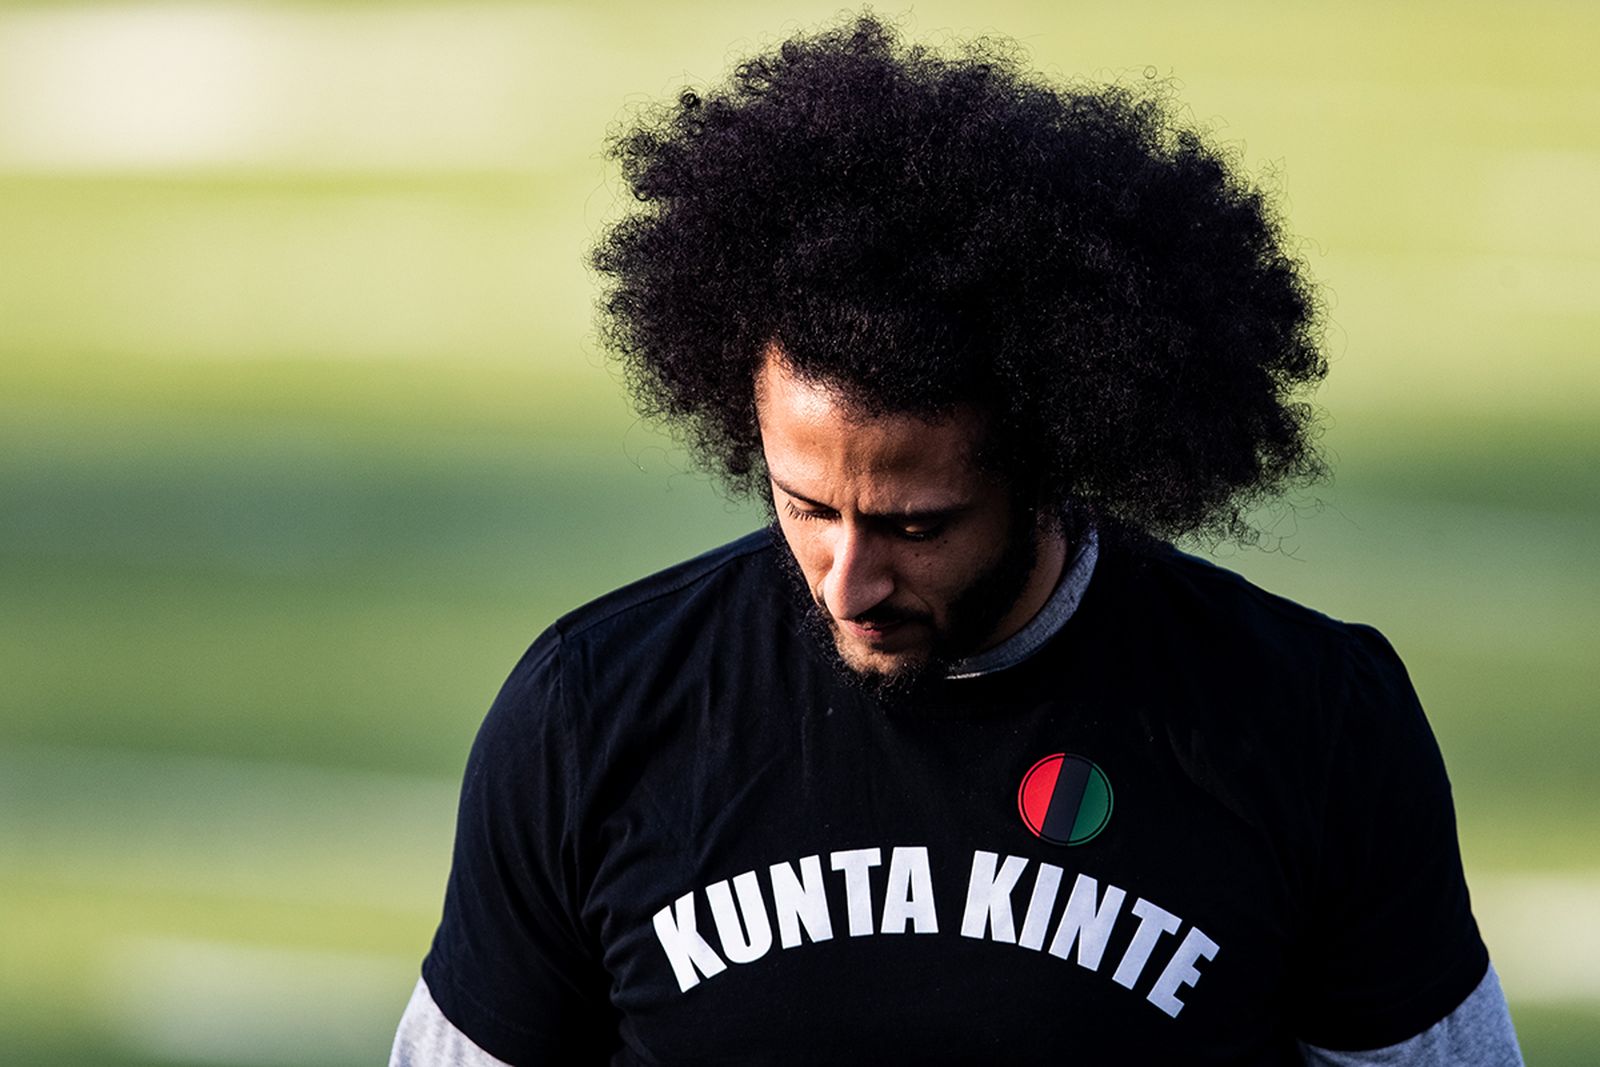 Colin Kaepernick looks on during his NFL workout